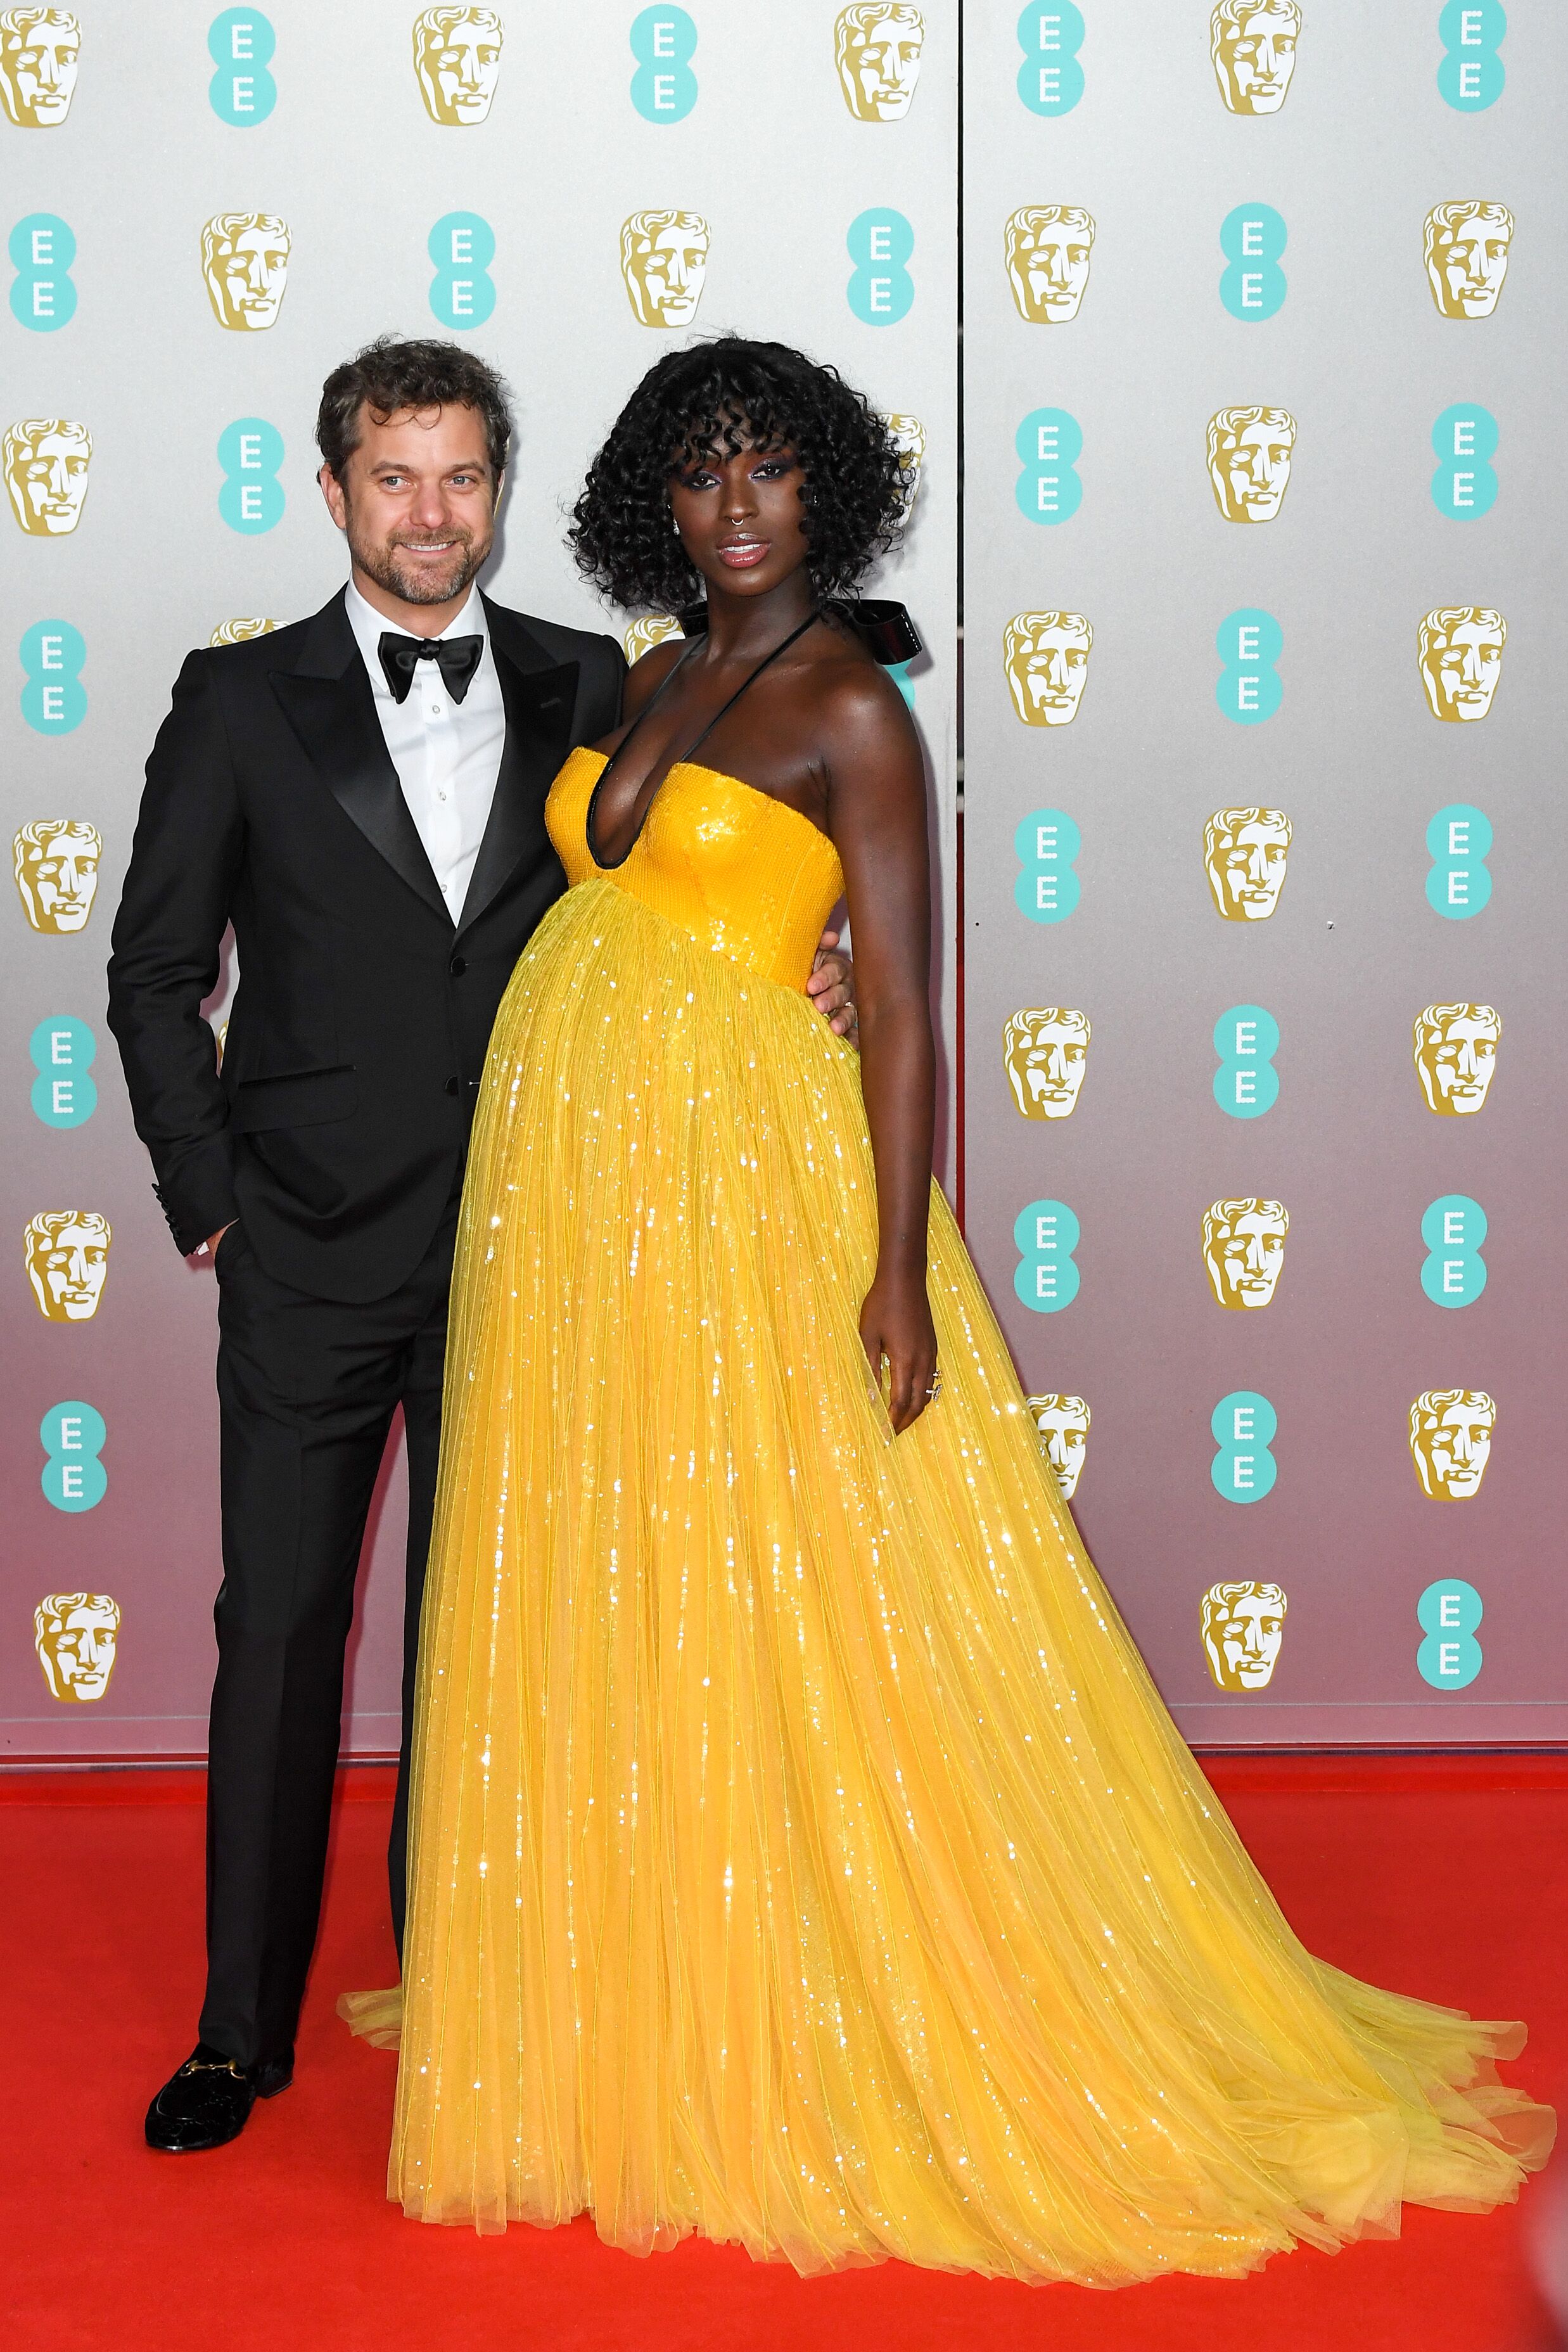 Jodie Turner-Smith and Joshua Jackson attend the EE British Academy Film Awards 2020 at Royal Albert Hall on February 02, 2020 in London, England. | Source: Getty Images